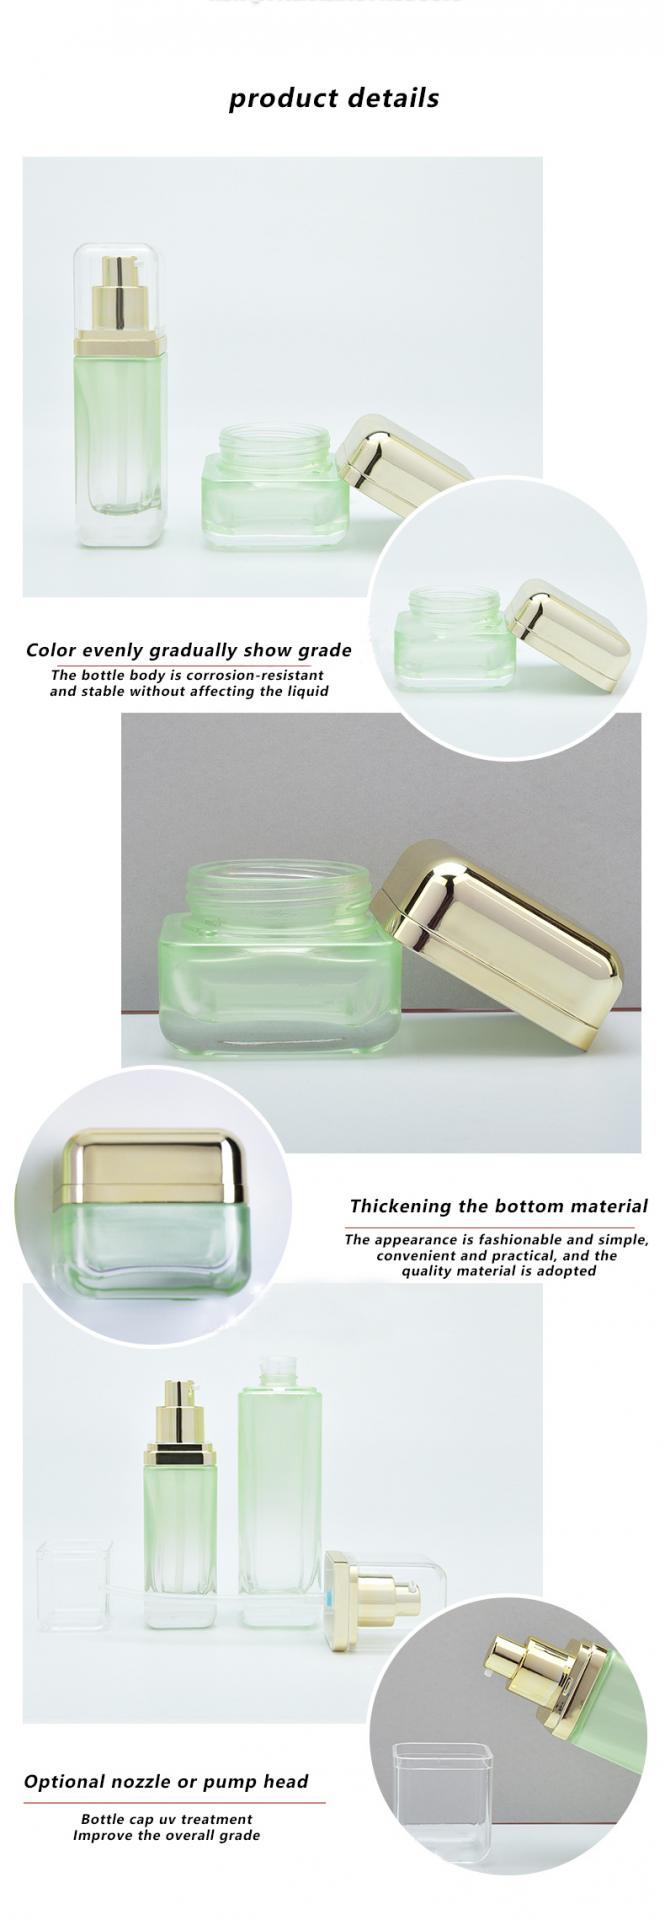 Wholesale Green Empty Makeup Containers, Skin Care Products In Glass Bottles